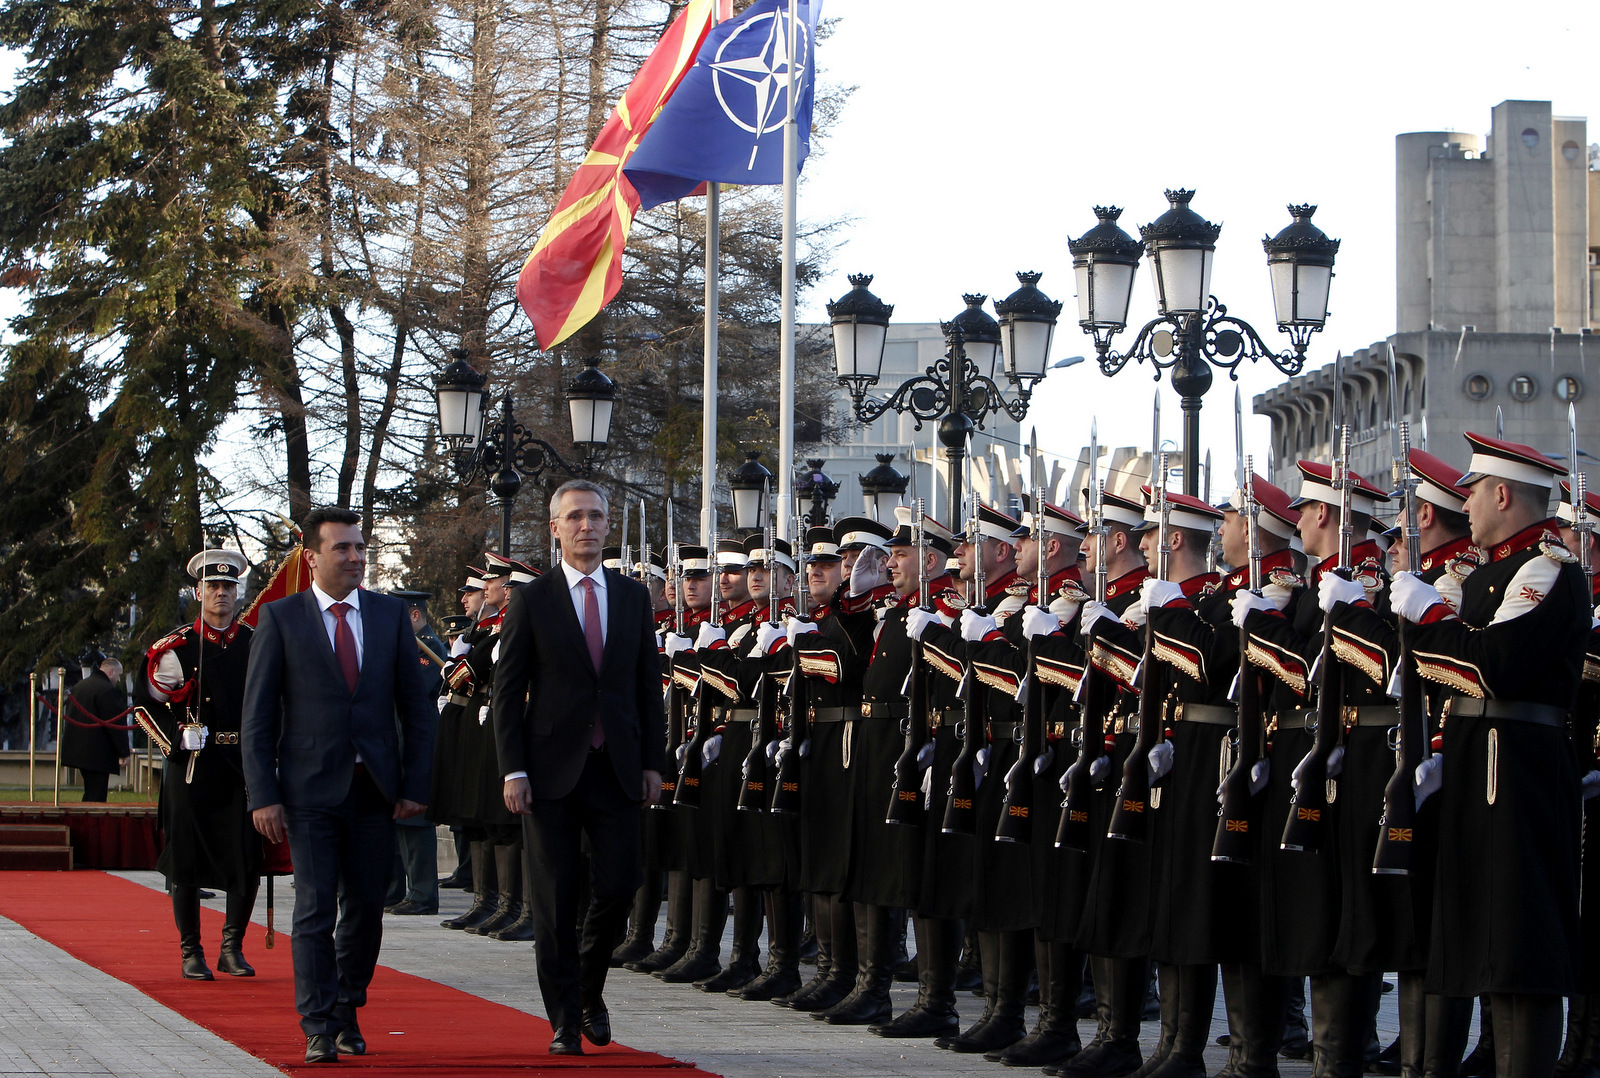 NATO Secretary General Jens Stoltenberg, second from left, accompanied by Macedonian Prime Minister Zoran Zaev, left, inspects an honor guard squad upon his arrival at the Government building in Skopje, Macedonia, Jan. 18, 2018. NATO's secretary-general urged Macedonia to solve its name dispute with Greece and proceed with wide-ranging reforms if it wants its membership bid to succeed. (AP/Boris Grdanoski)